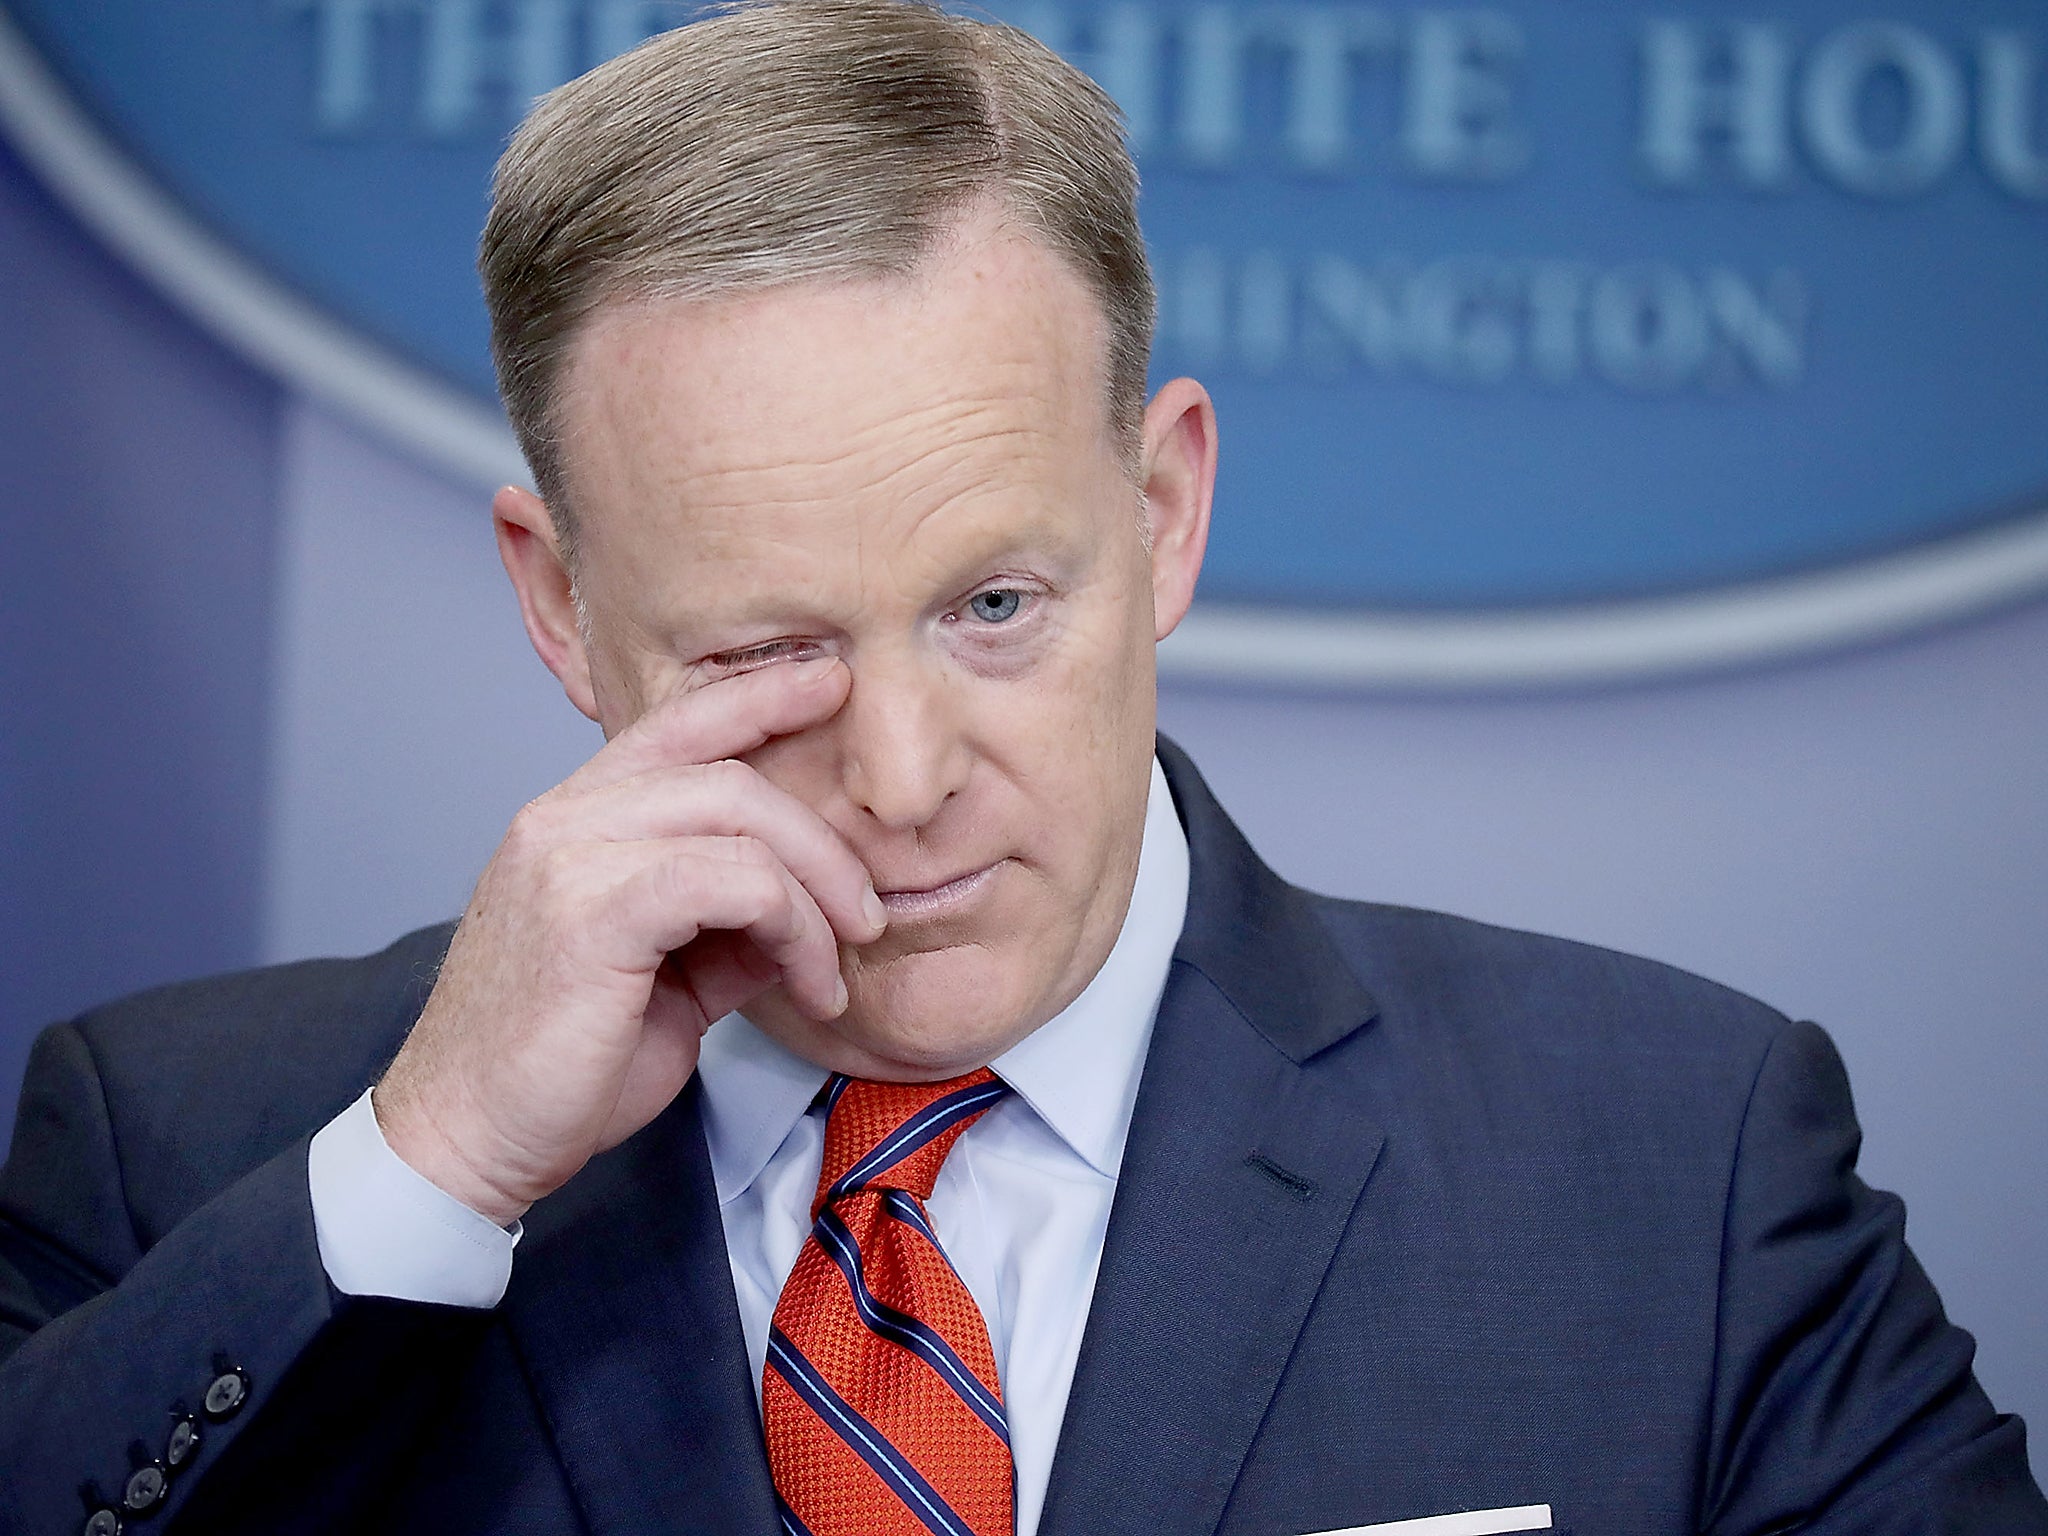 It’s doubtful whether Sean Spicer could even give the dates of the First World War